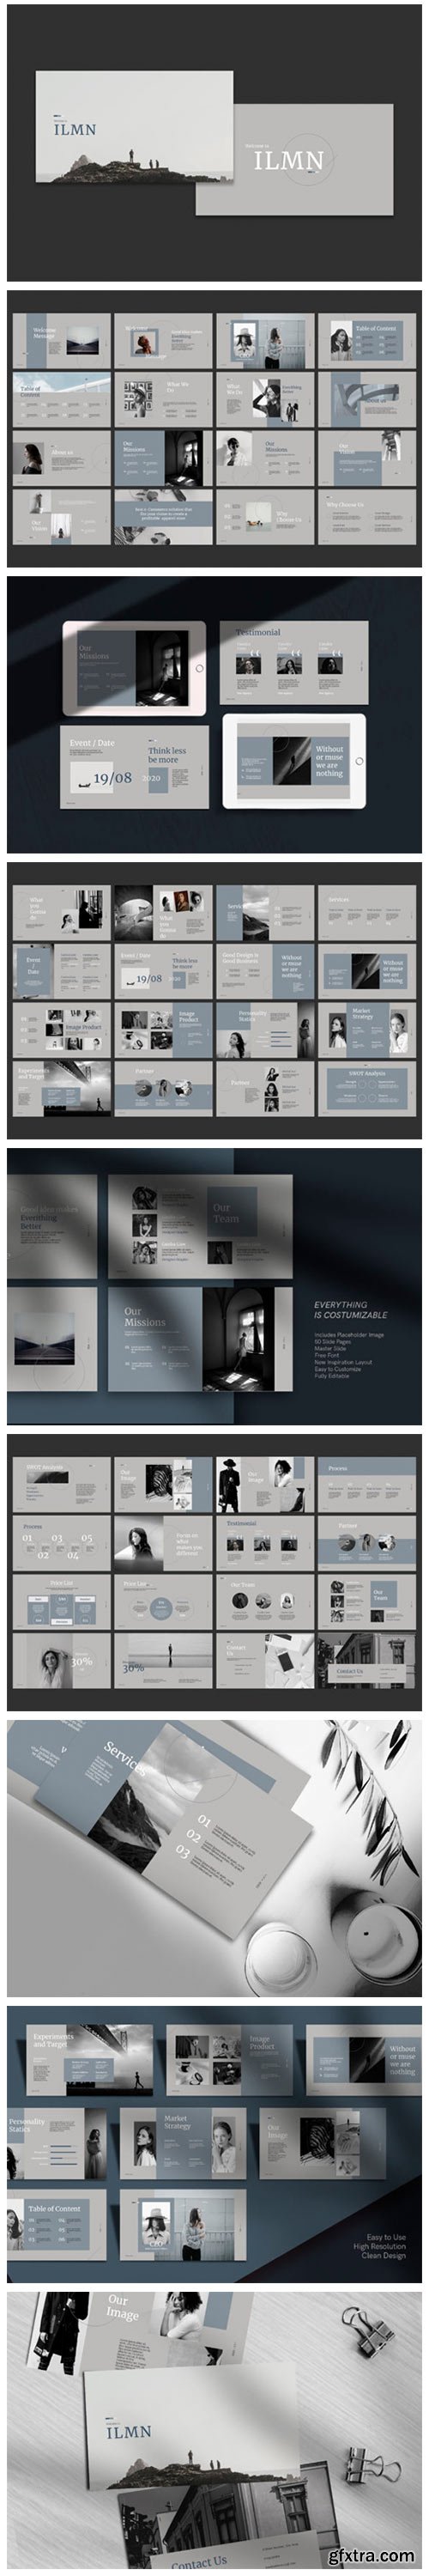 corporate-powerpoint-templates-2321347-gfxtra